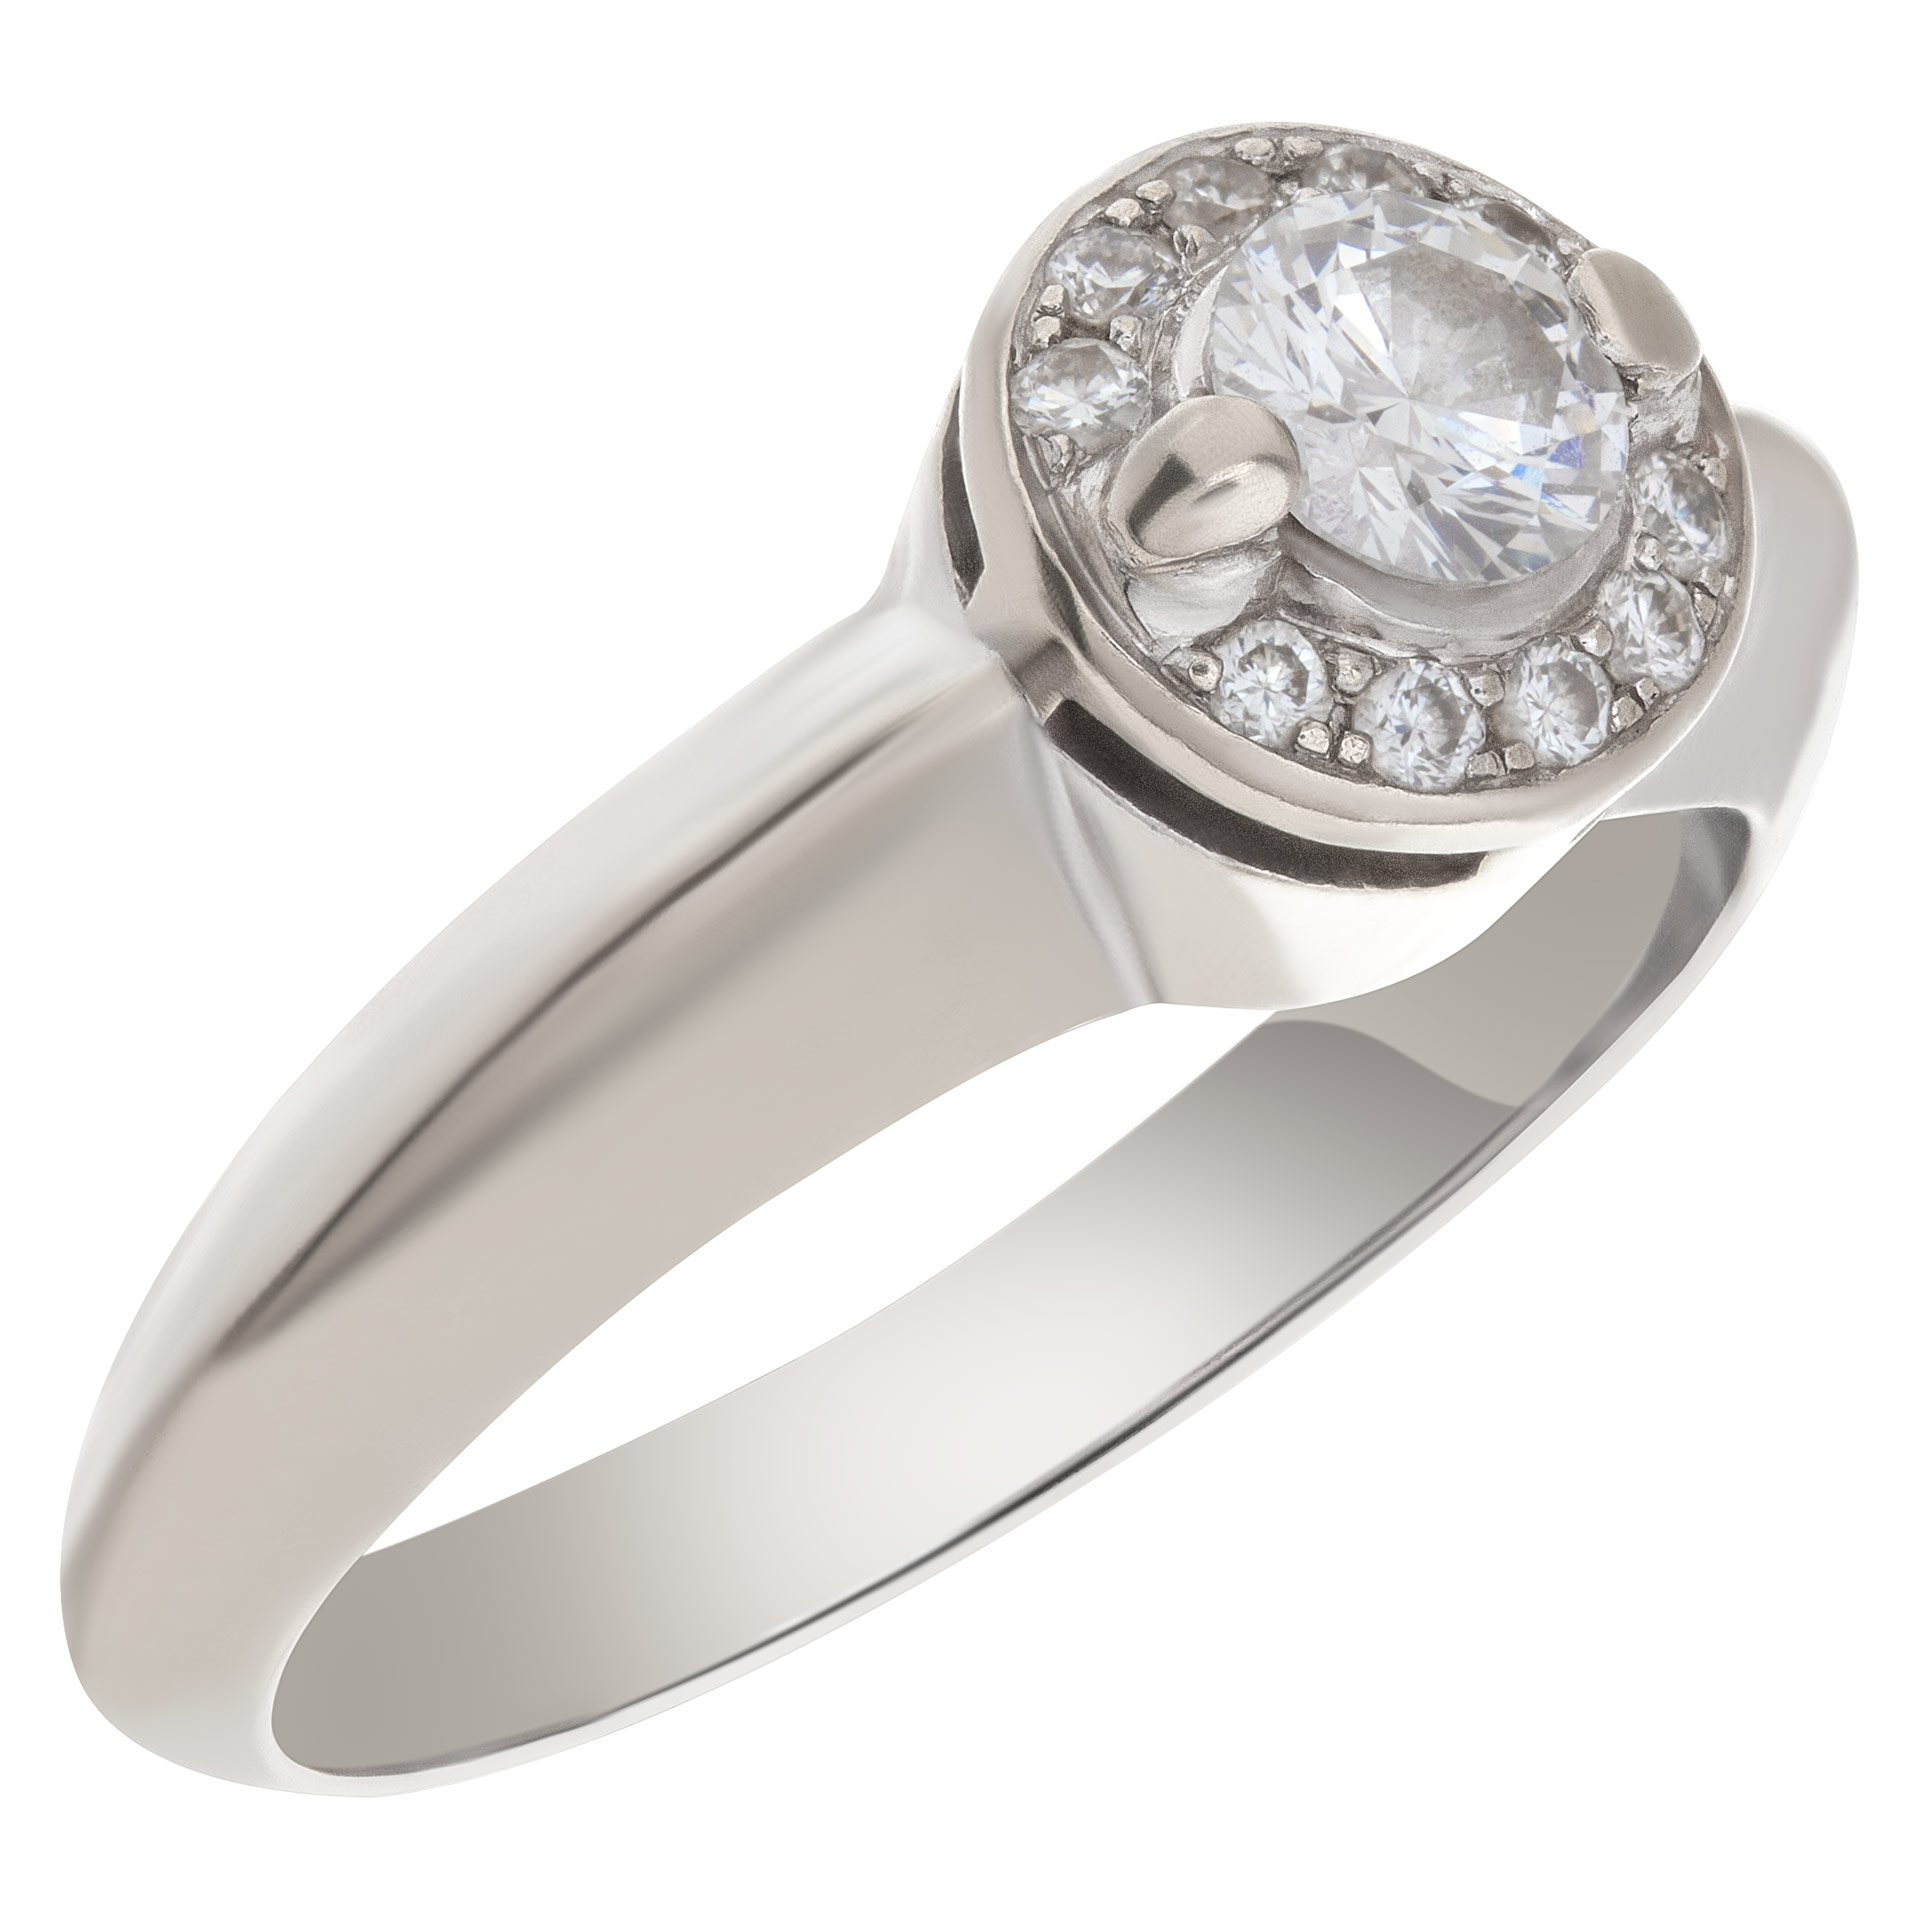 Diamond ring in 18k white gold with approximately 0.43 carats image 2